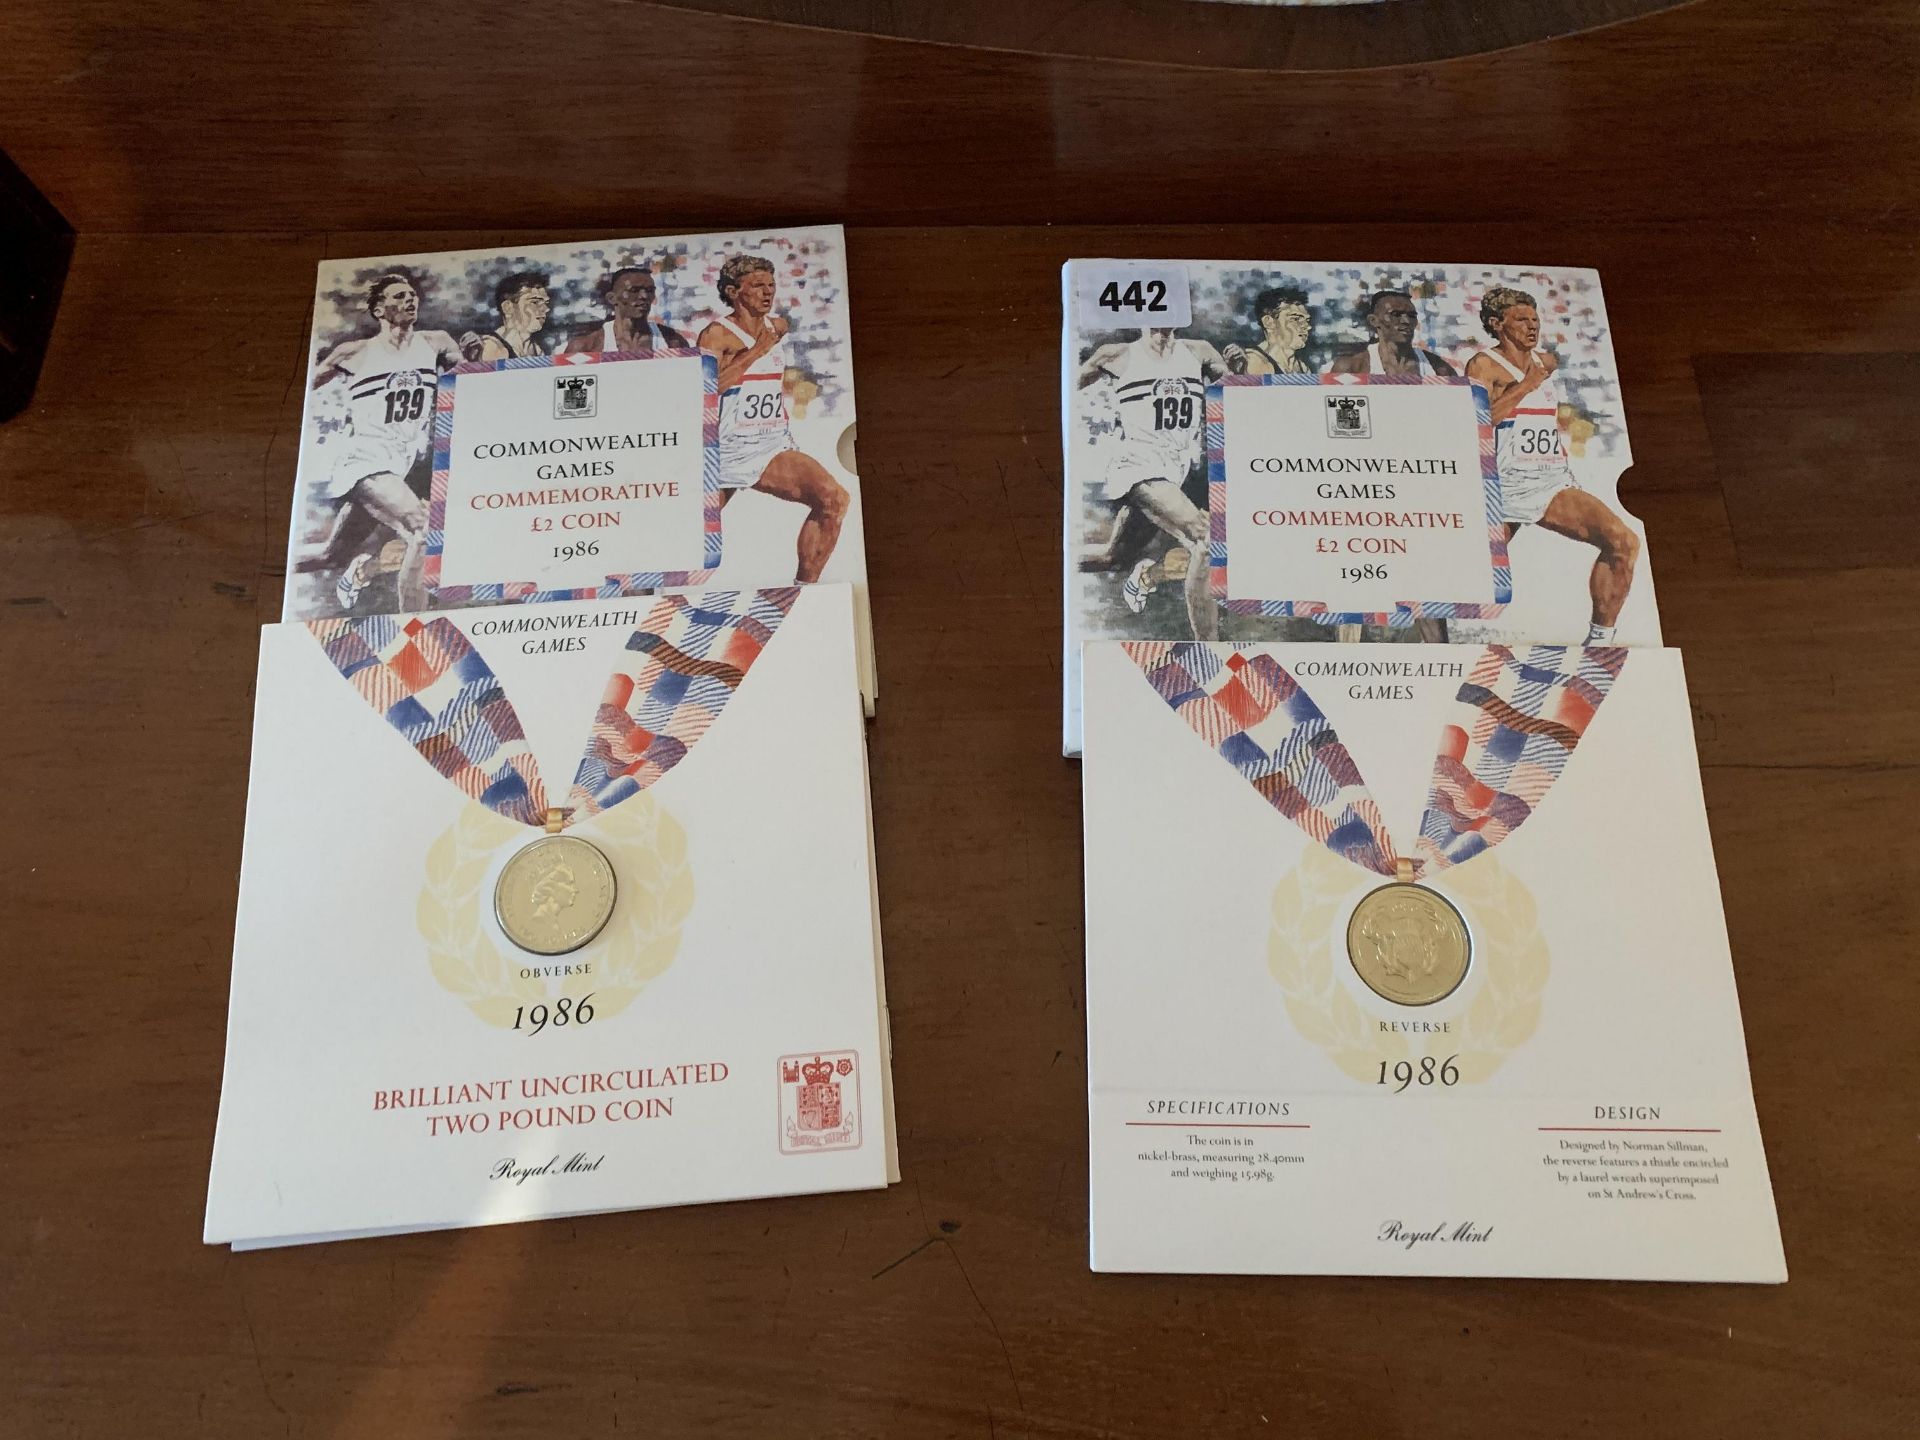 2x 1986 Commonwealth Games commemorative £2 coins